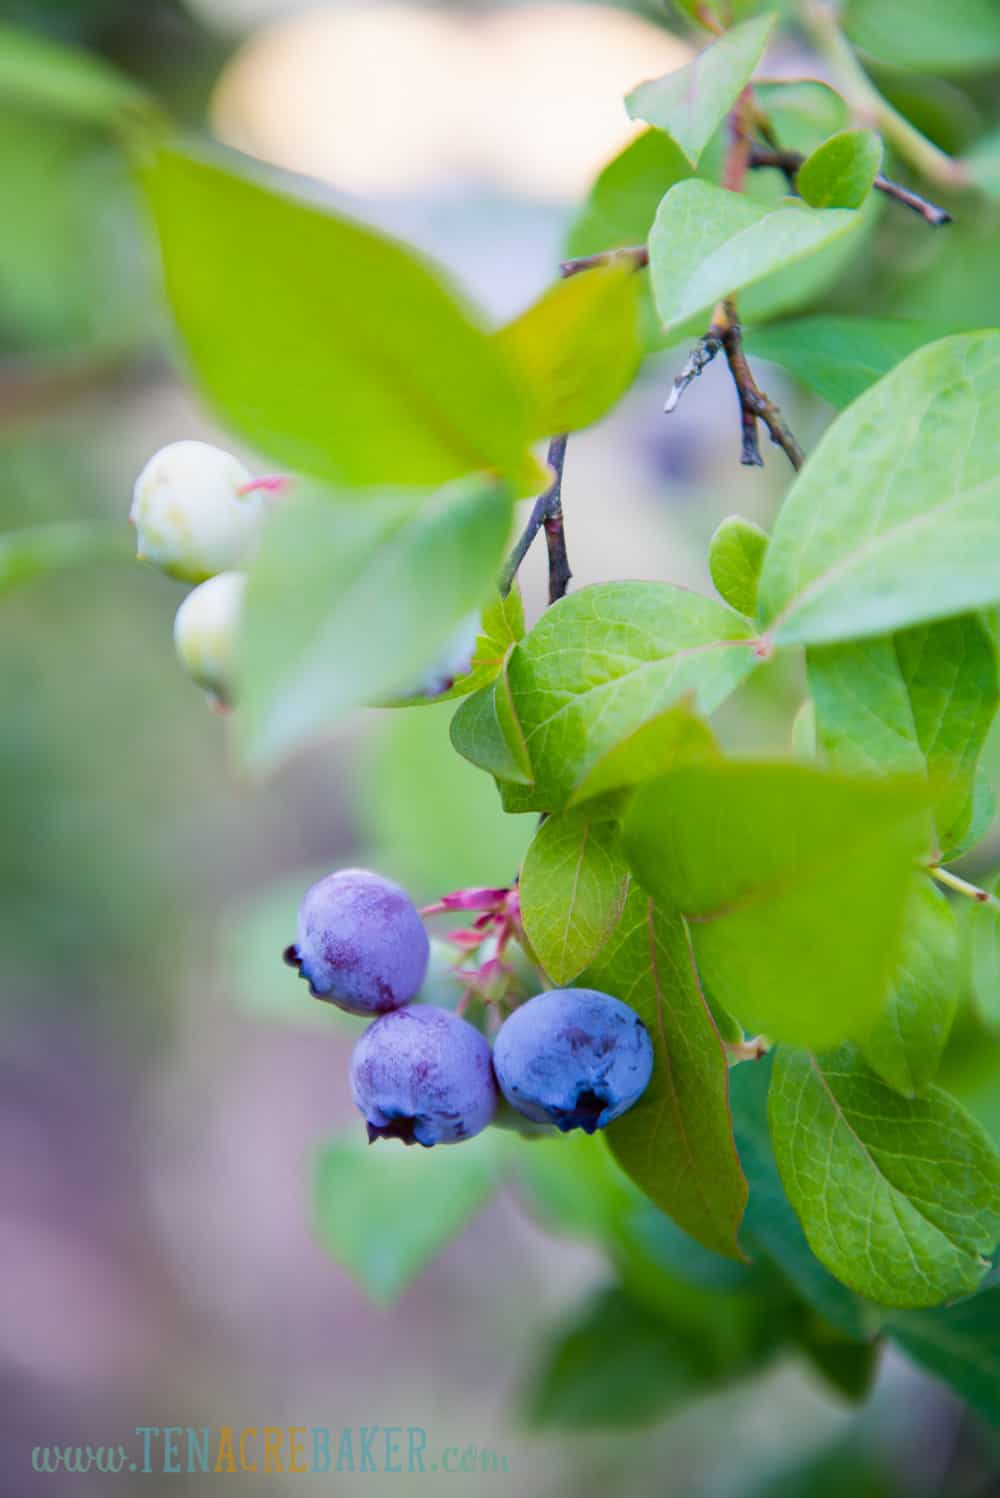 blueberries on the plant